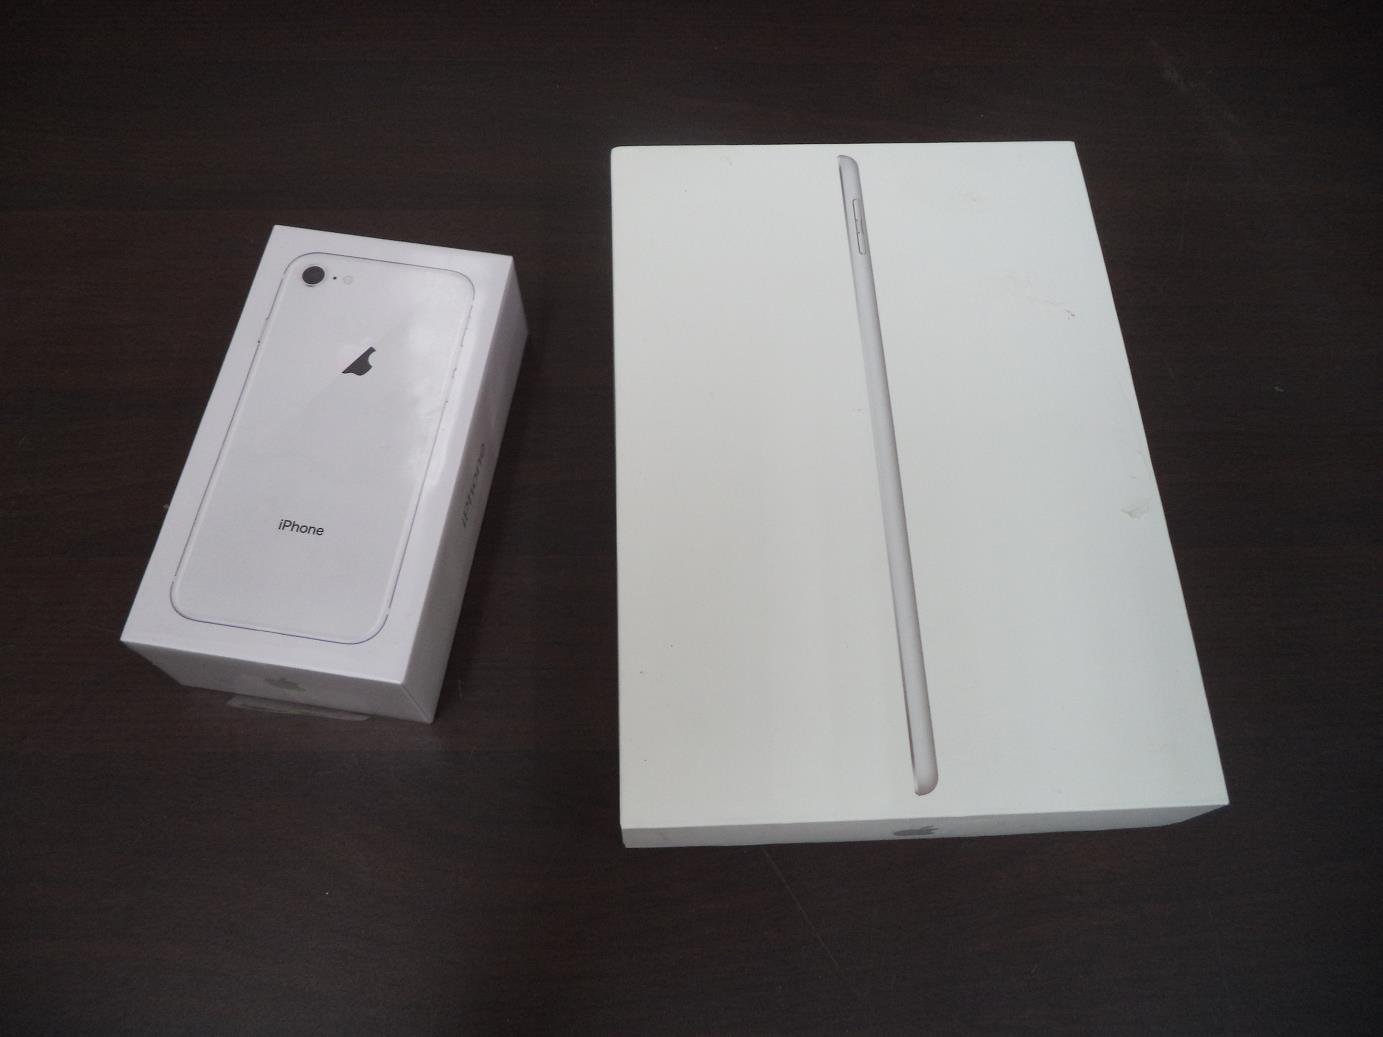 Lot # 52 of the IRS auction: iPad 9.7 and iPhone 8